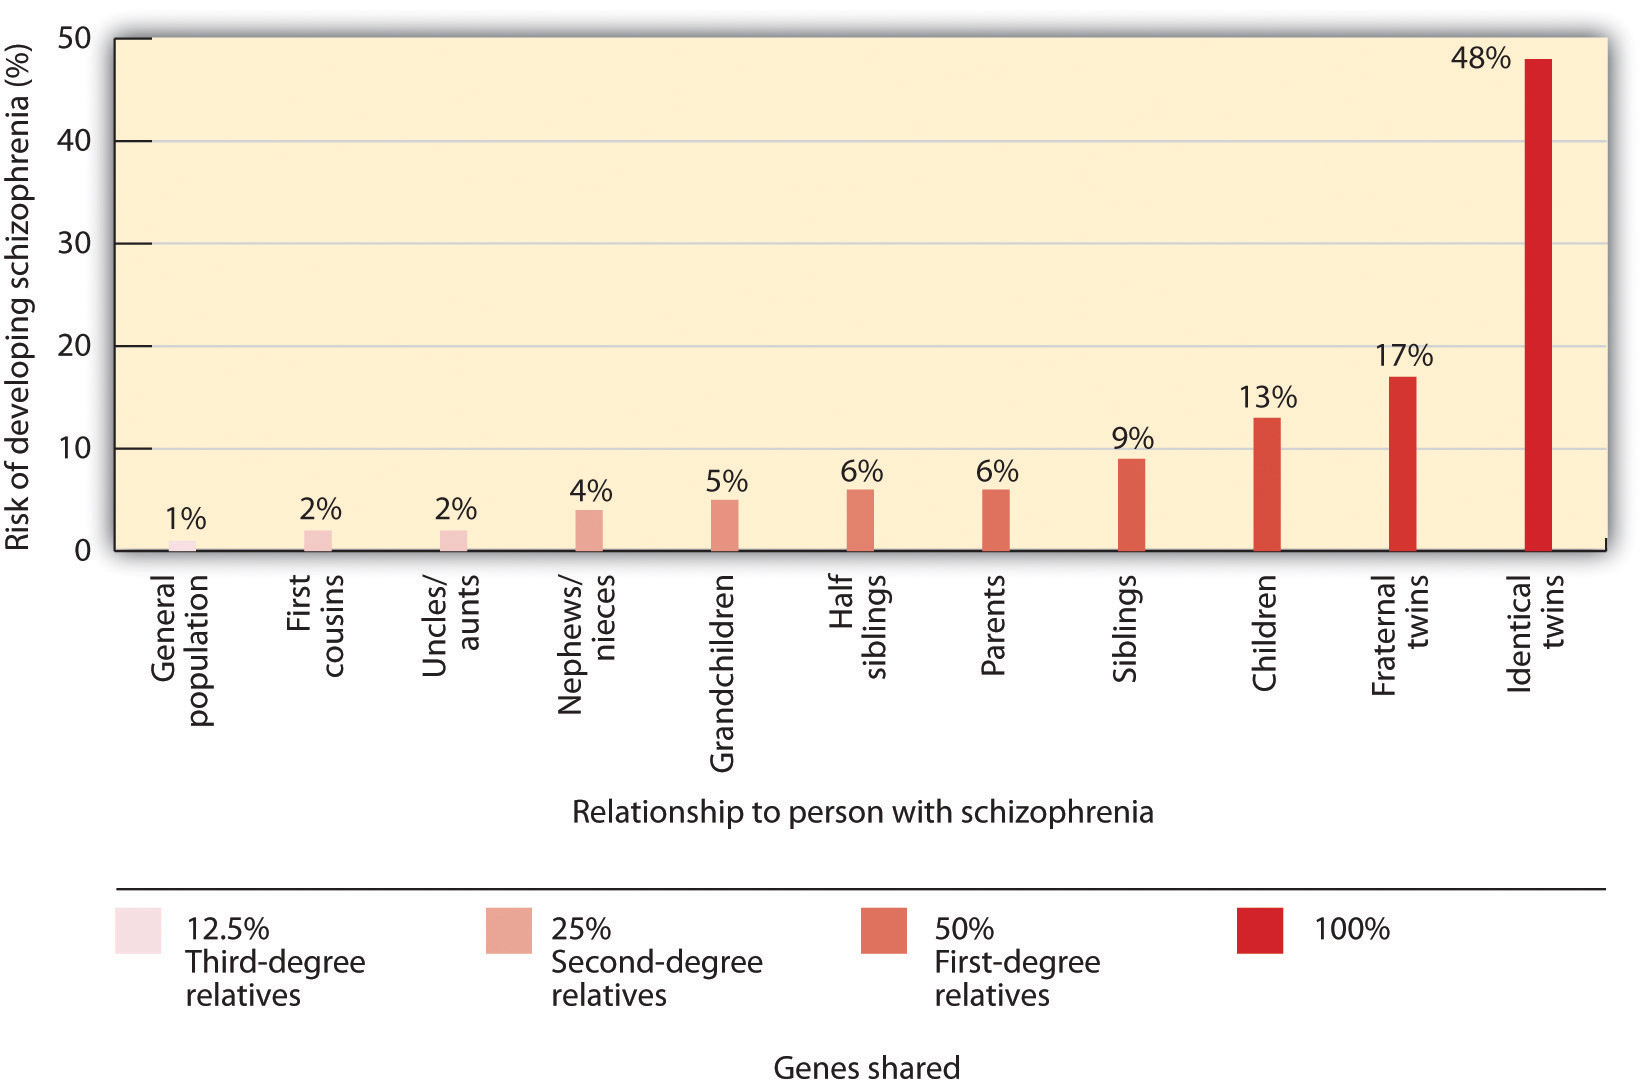 This chart contrasts risk of developing schizophrenia (%) by relationship to person with schizophrenia to identify genetic disposition to develop schizophrenia. Long description available.